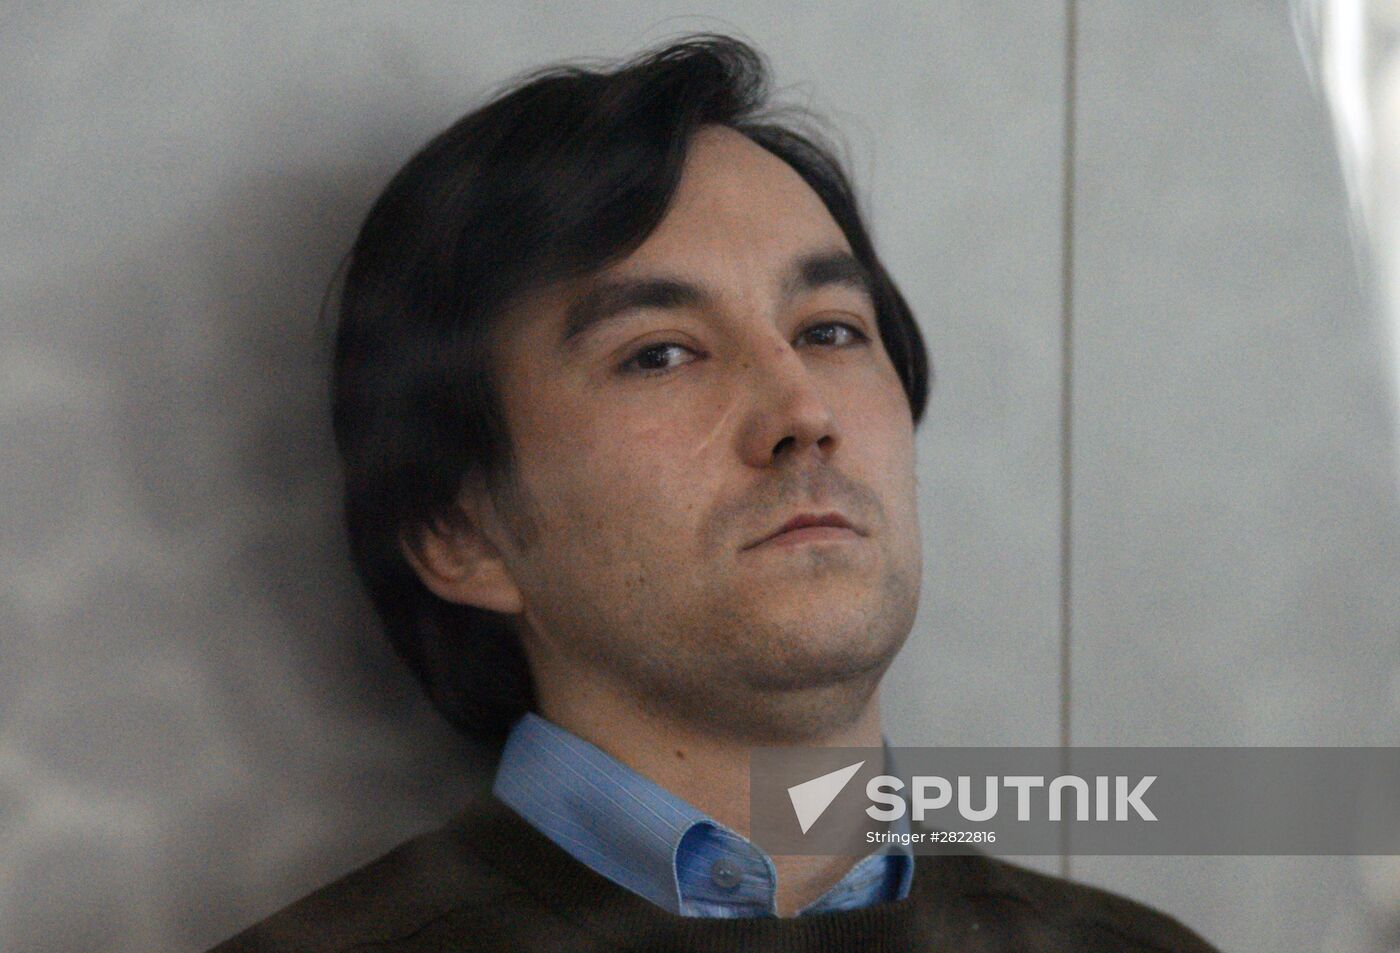 Kiev Court continues considering the case of Russian nationals Yevgeny Yerofeyev and Alexander Aleksandrov